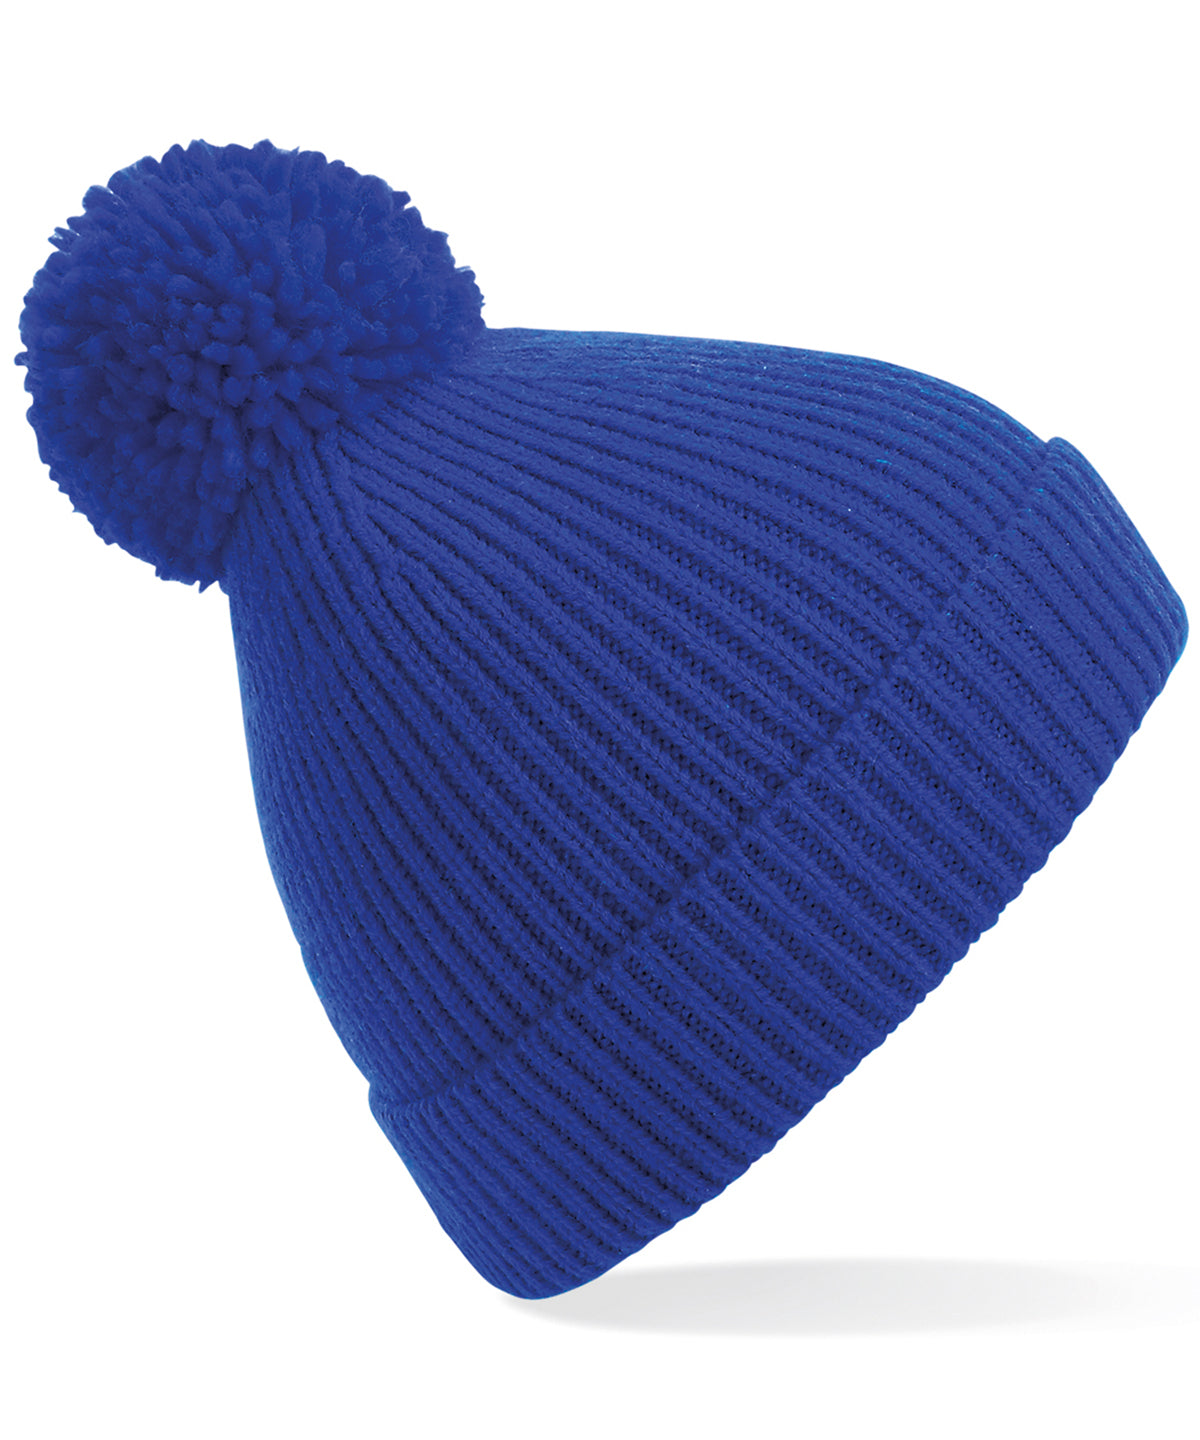 Personalised Hats - Royal Beechfield Engineered knit ribbed pom pom beanie